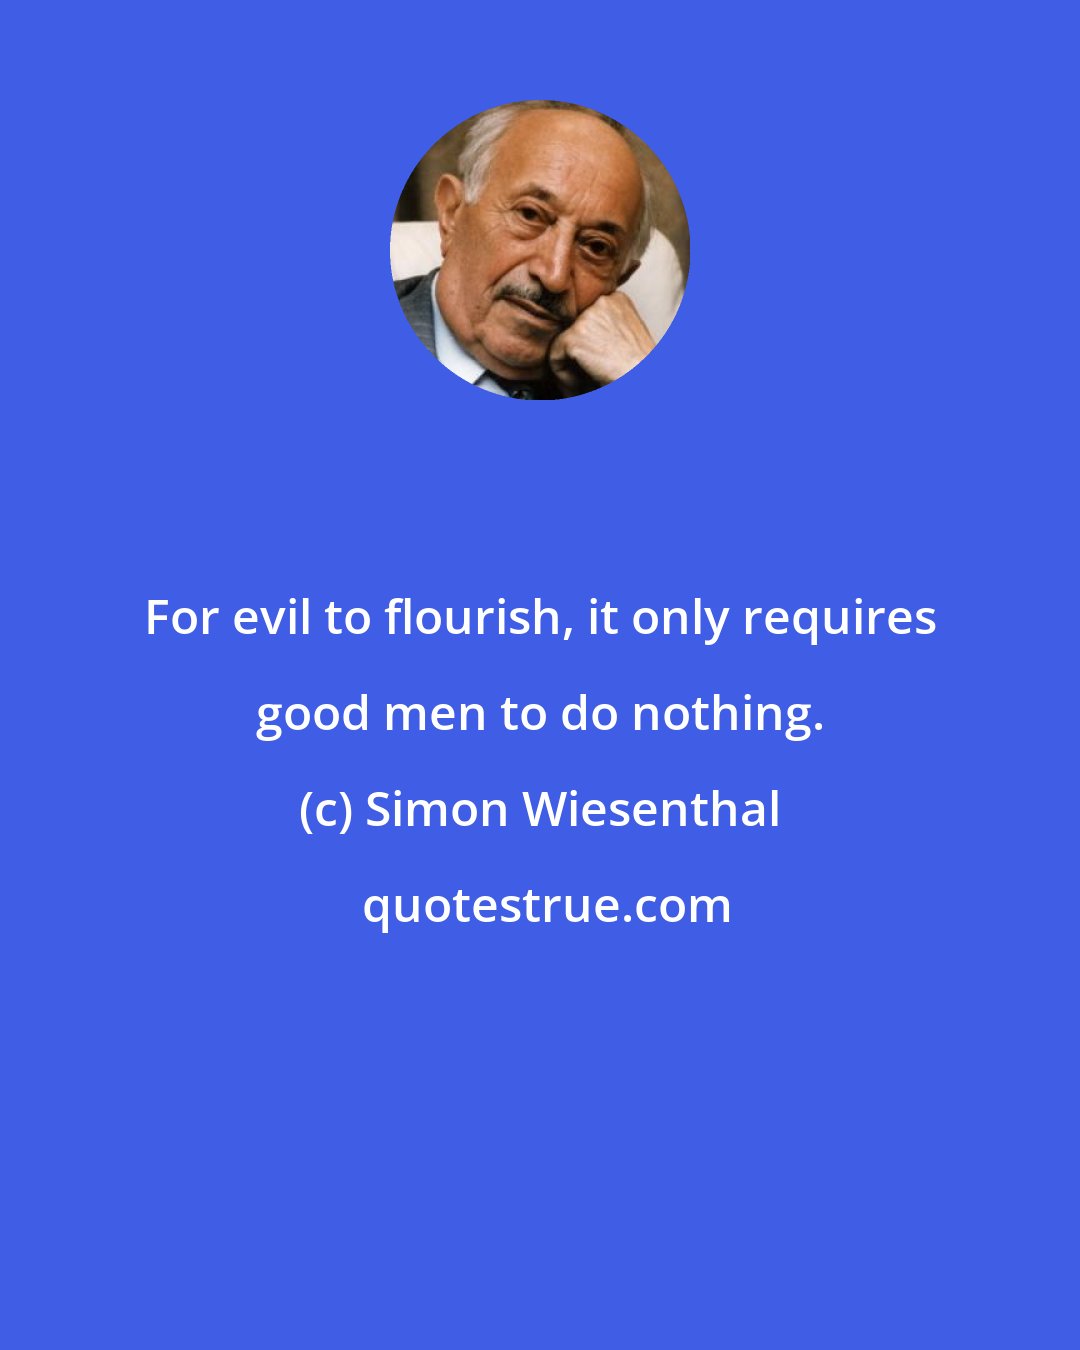 Simon Wiesenthal: For evil to flourish, it only requires good men to do nothing.